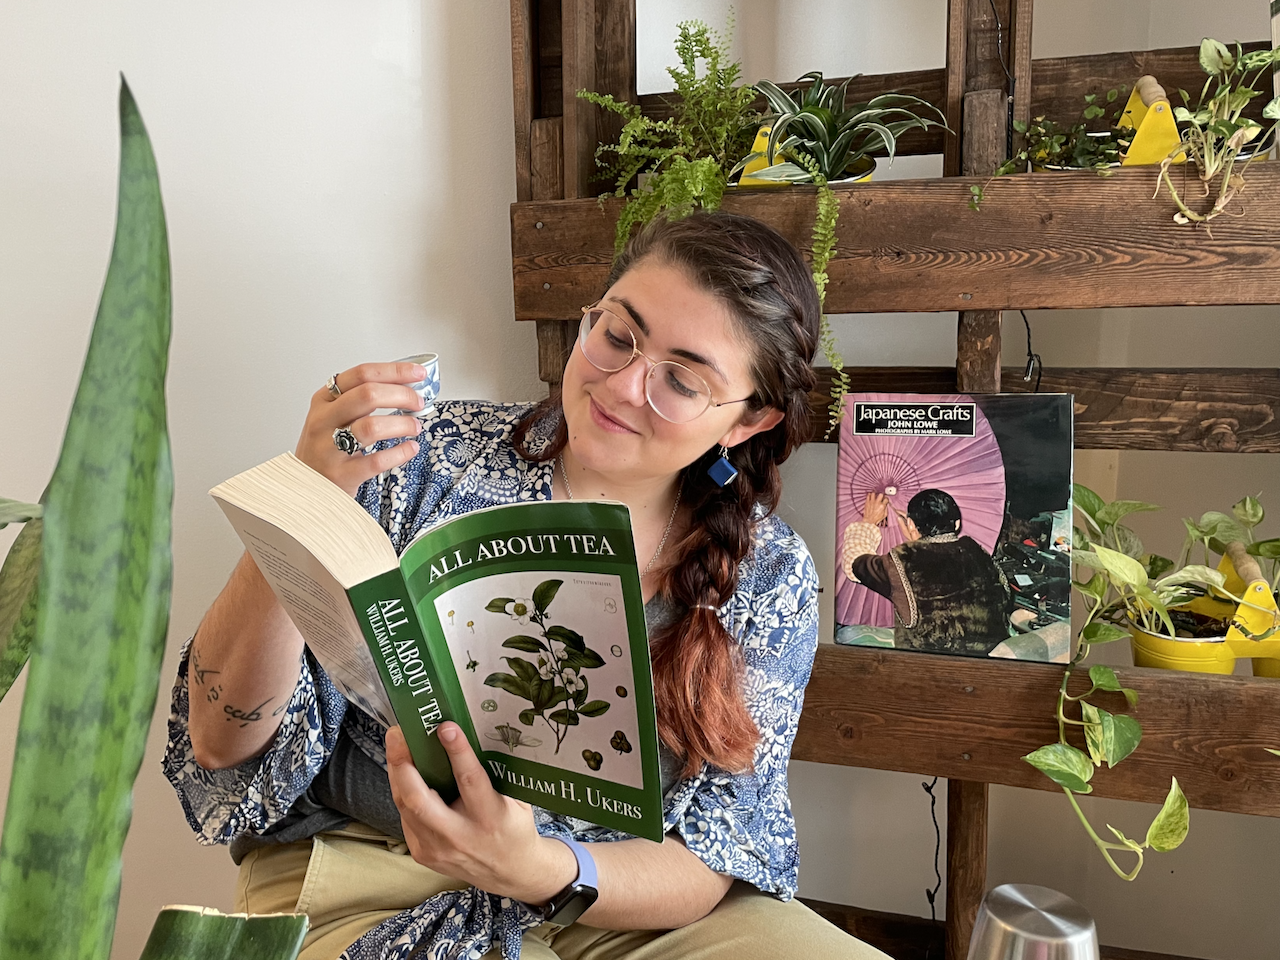 A photo of me sitting and reading a book, tiny tea cup in hand, surrounded by many green plants. I'm wearing little book-shapped earrings and the book is called All About Tea.